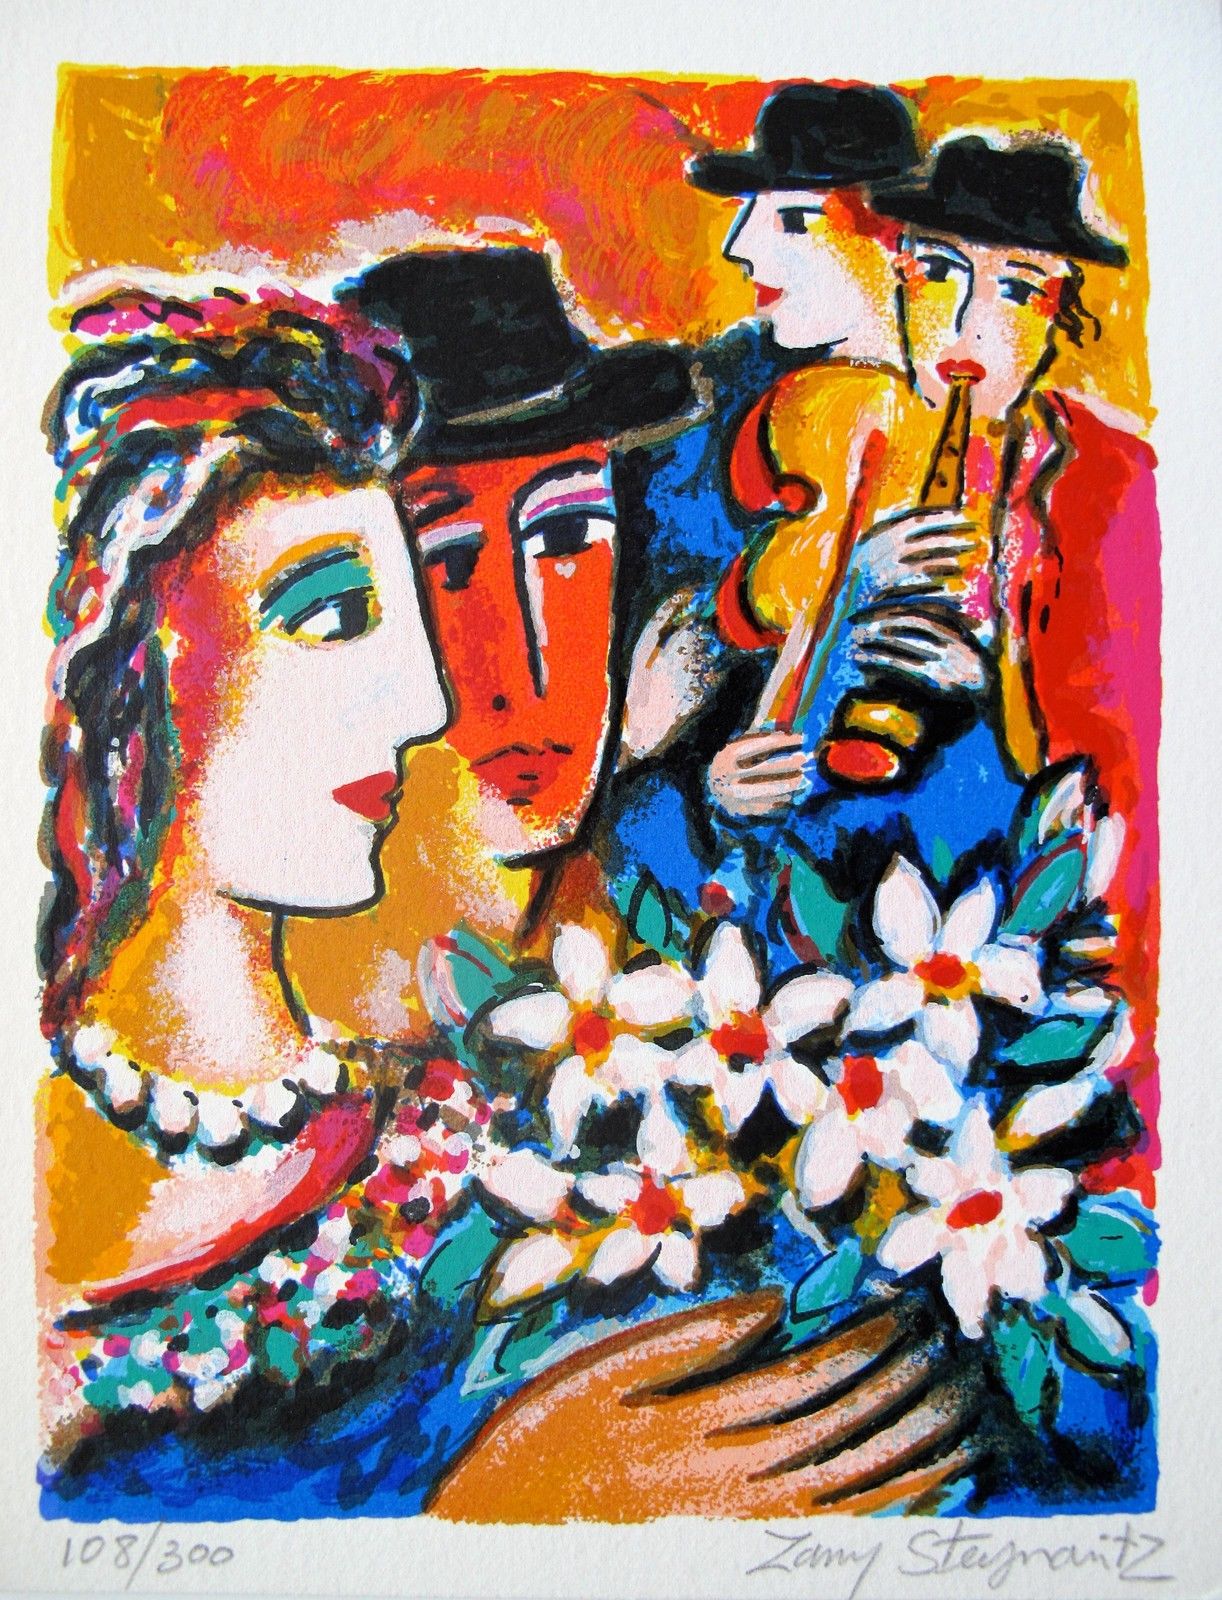 Zamy Steynovitz LOVERS SERENADE Hand Signed Limited Edition Lithograph